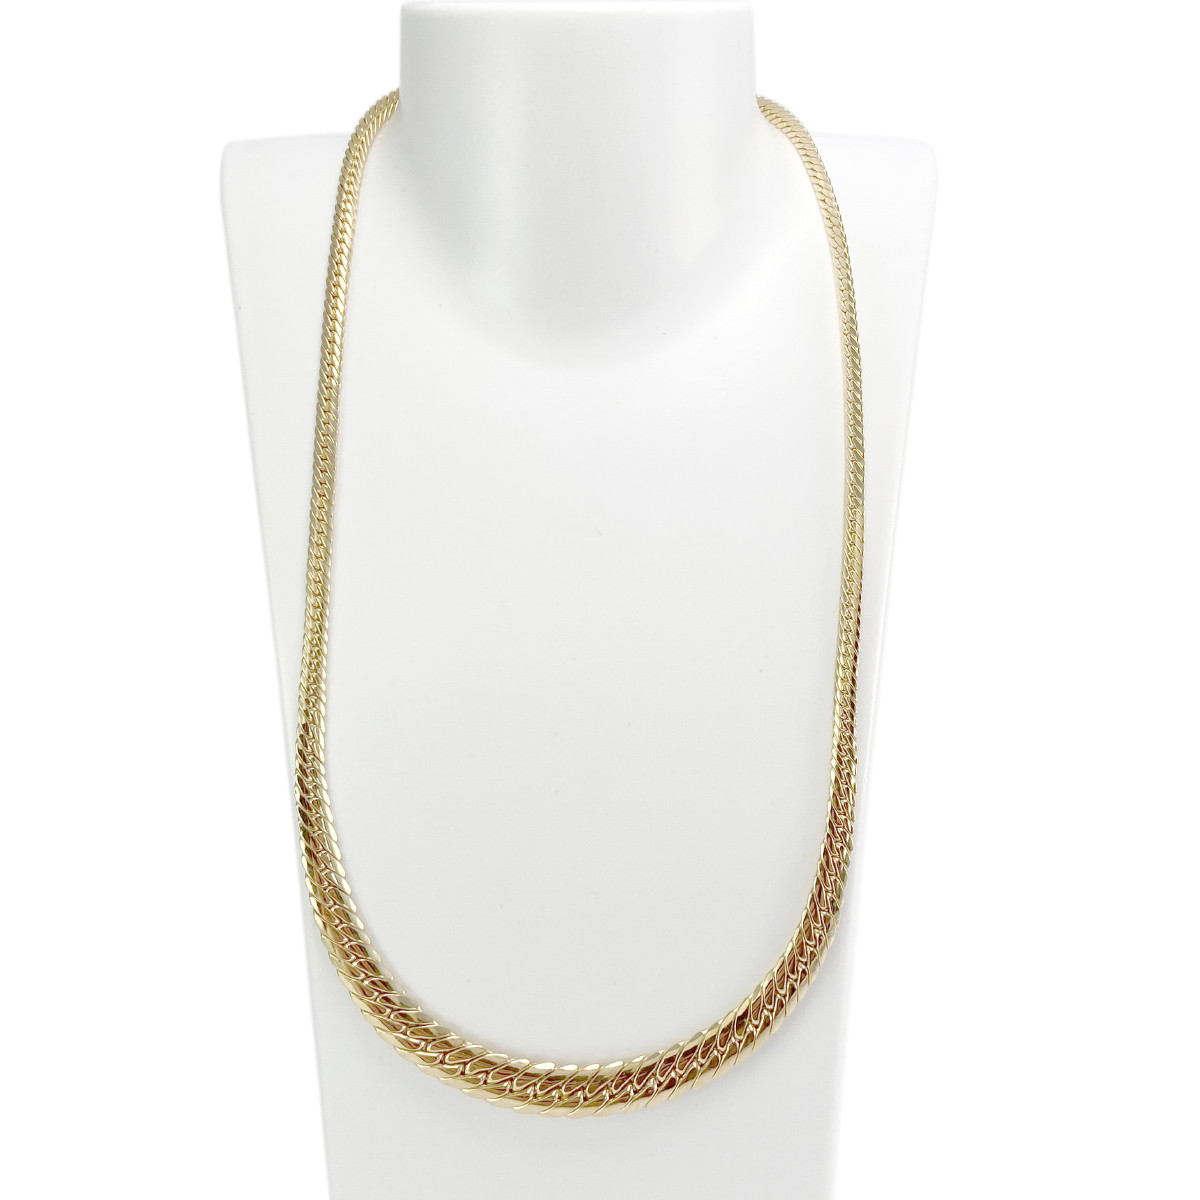 Collier d'occasion or jaune 750 maille anglaise - vue 2